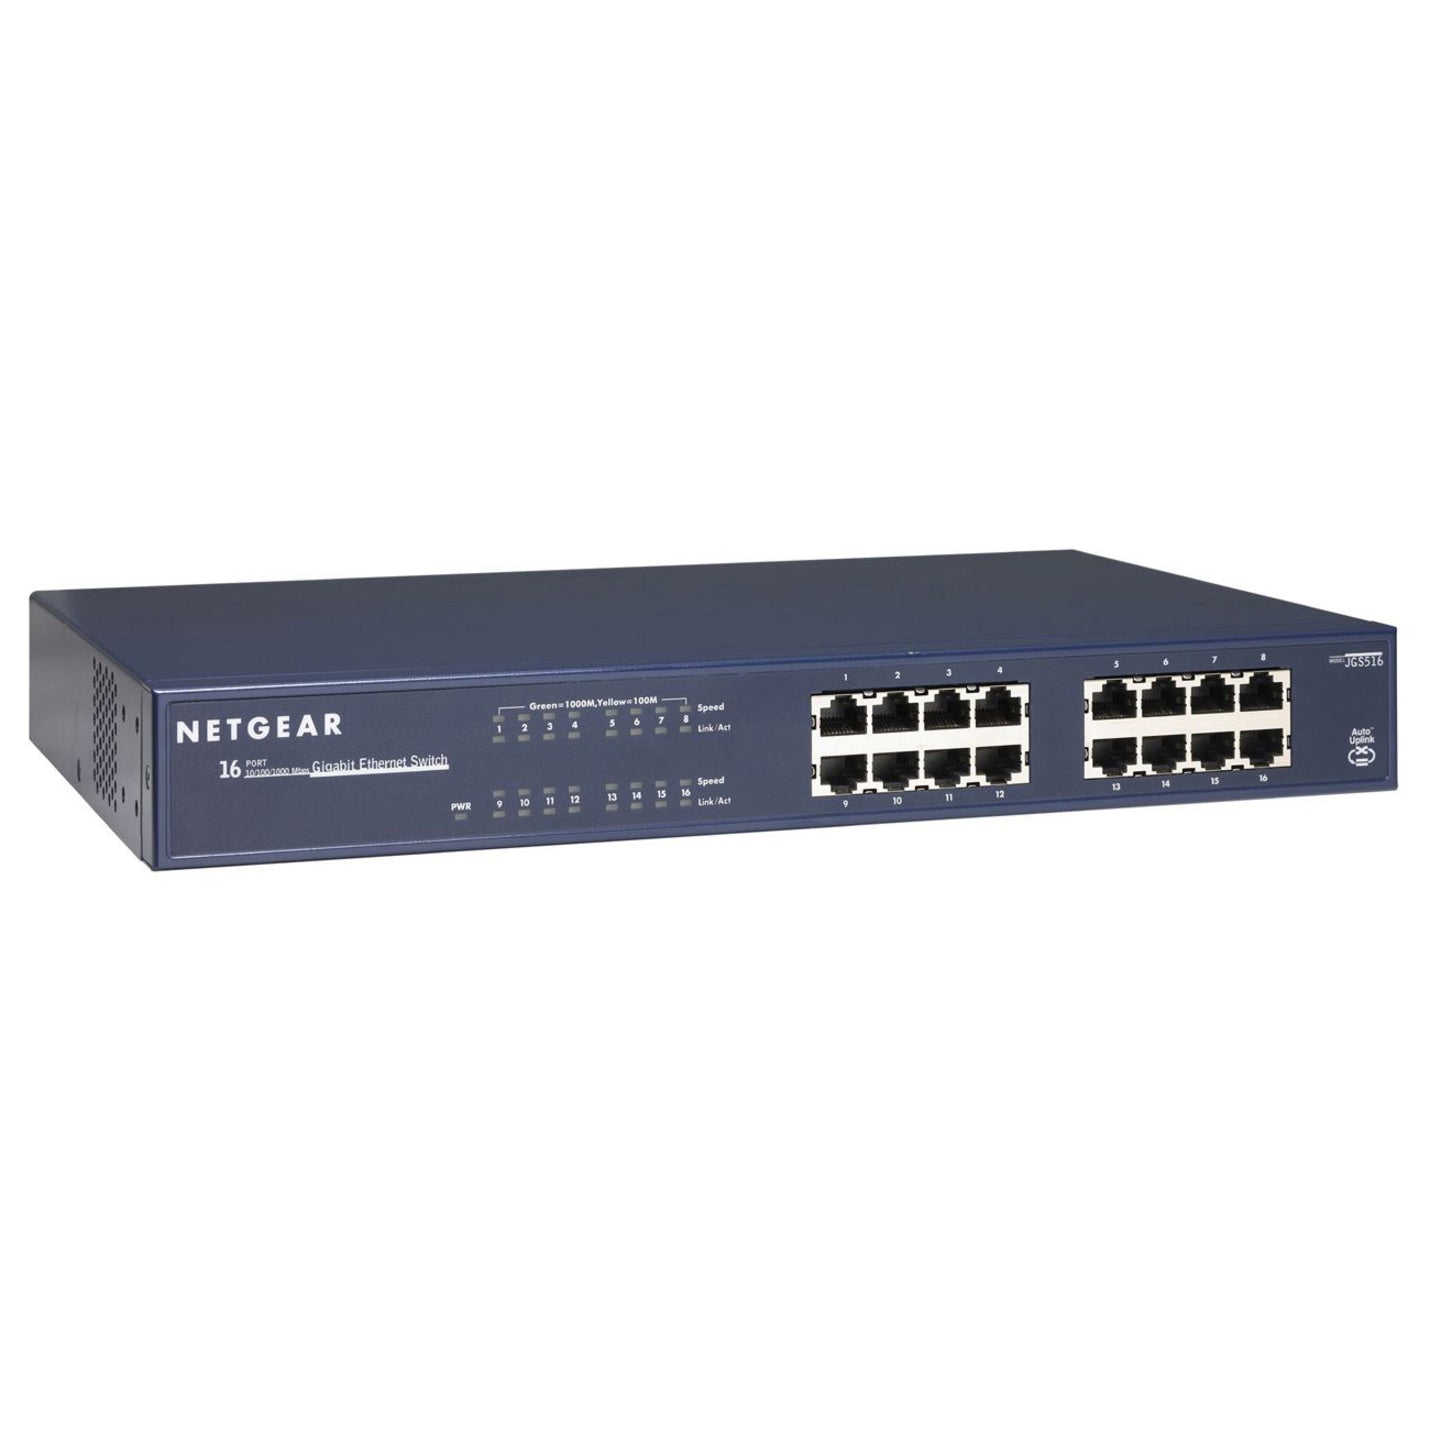 NETGEAR JGS516NA ProSafe 16-Port Gigabit Unmanaged Switch, Reliable and High-Performance Ethernet Switch